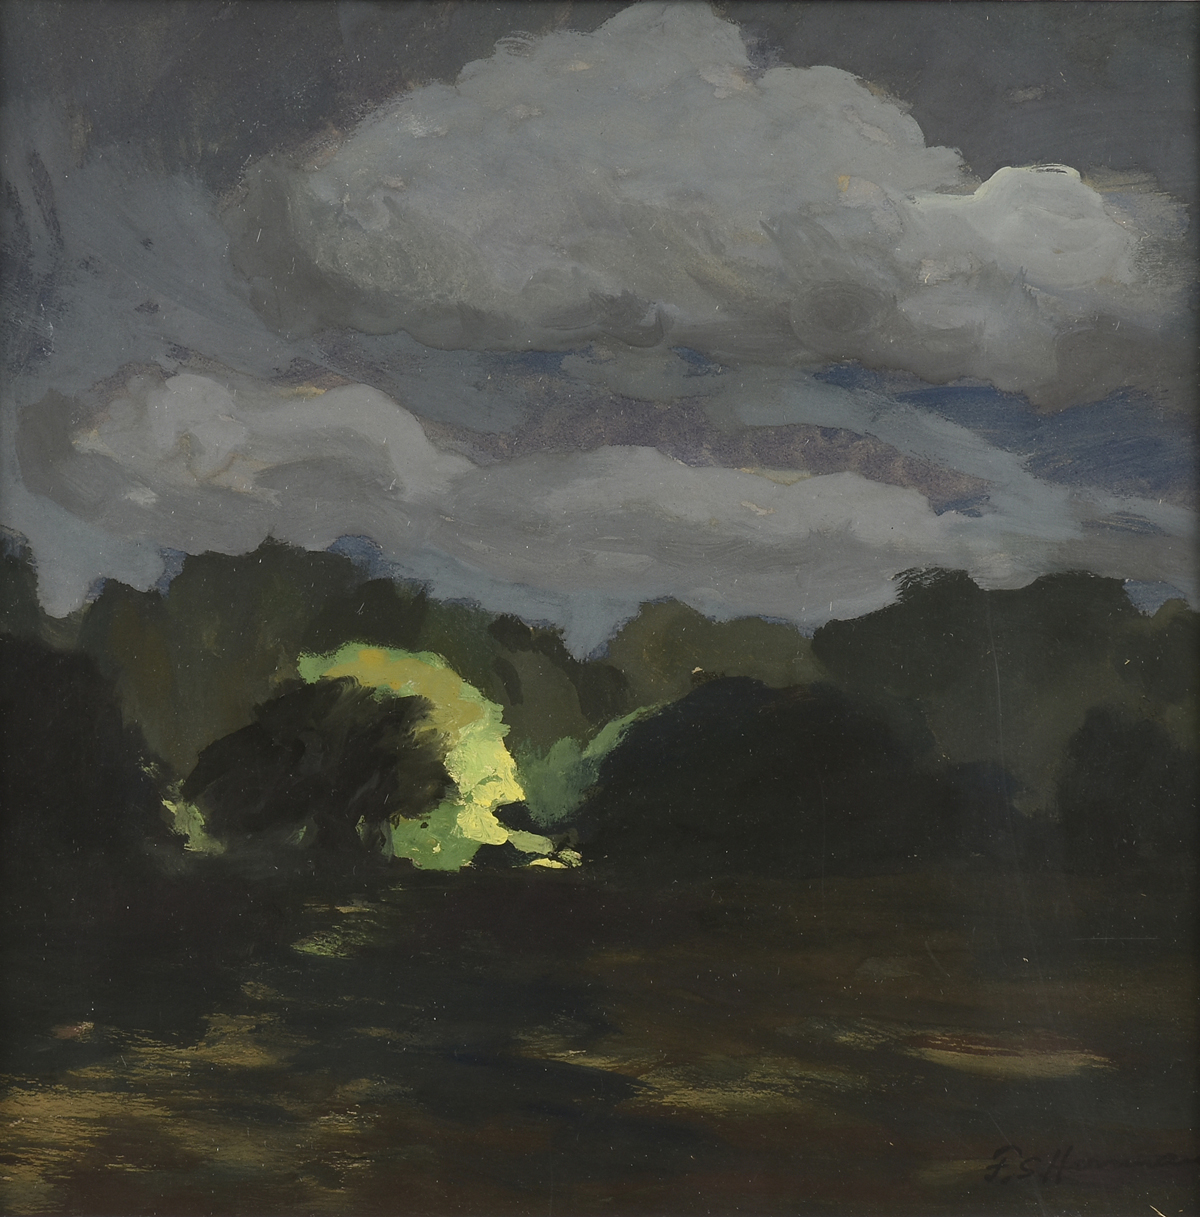 FRANK SIMON HERRMANN (AMERICAN 1866-1942), A PAINTING, "Moonlit Clouds," gouache on paper, signed